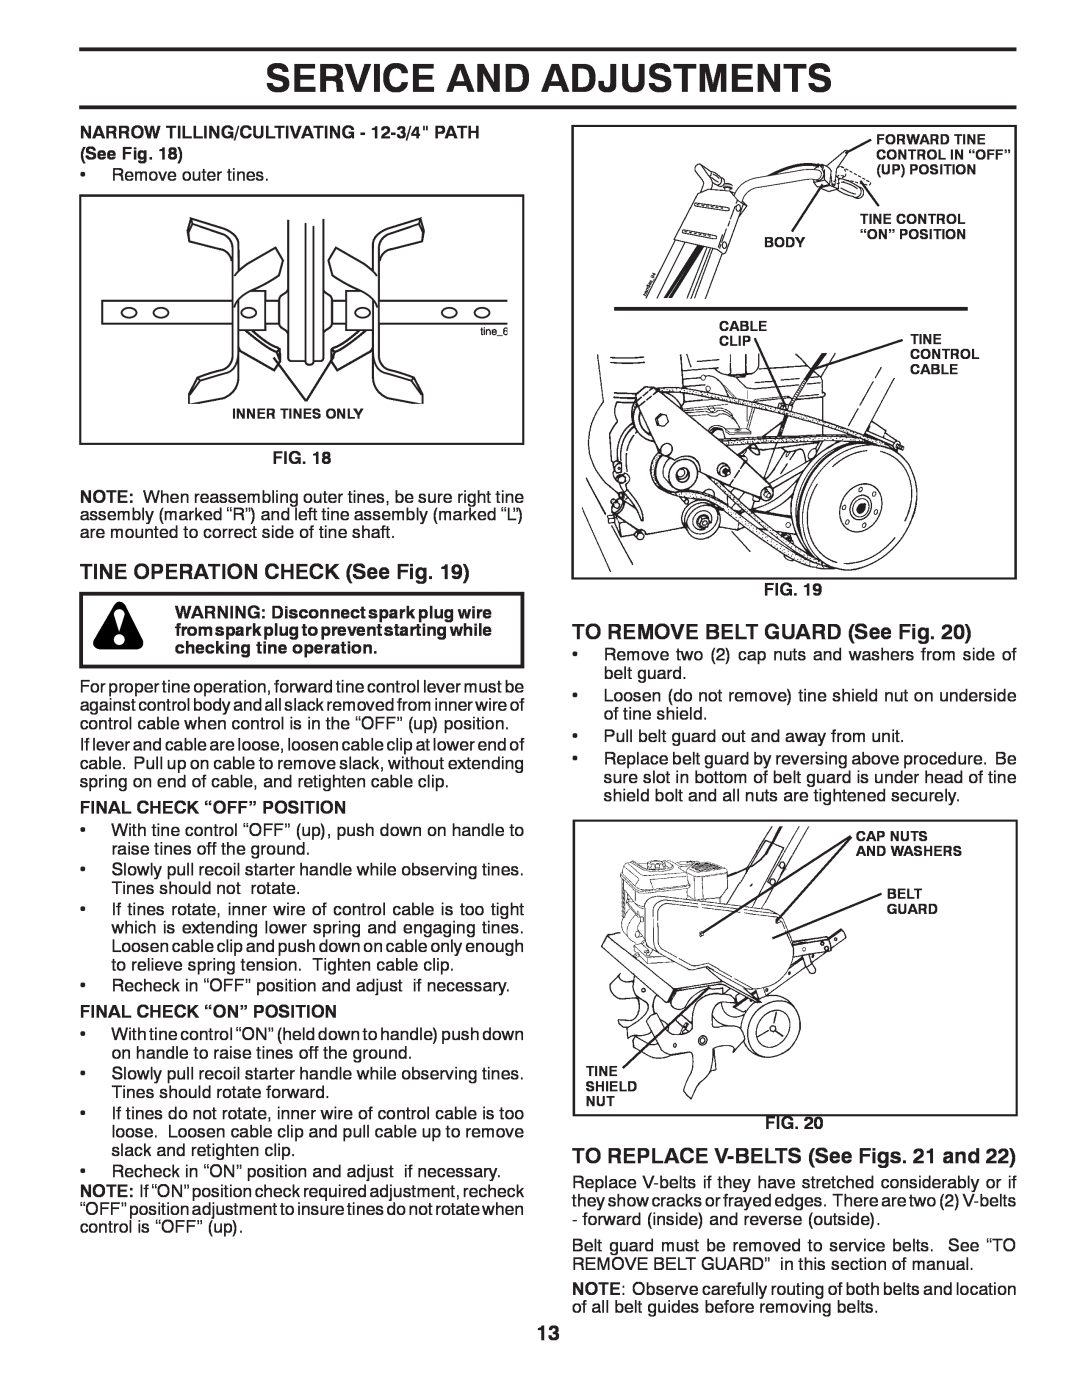 Poulan 413288 manual TINE OPERATION CHECK See Fig, TO REMOVE BELT GUARD See Fig, TO REPLACE V-BELTS See Figs. 21 and 